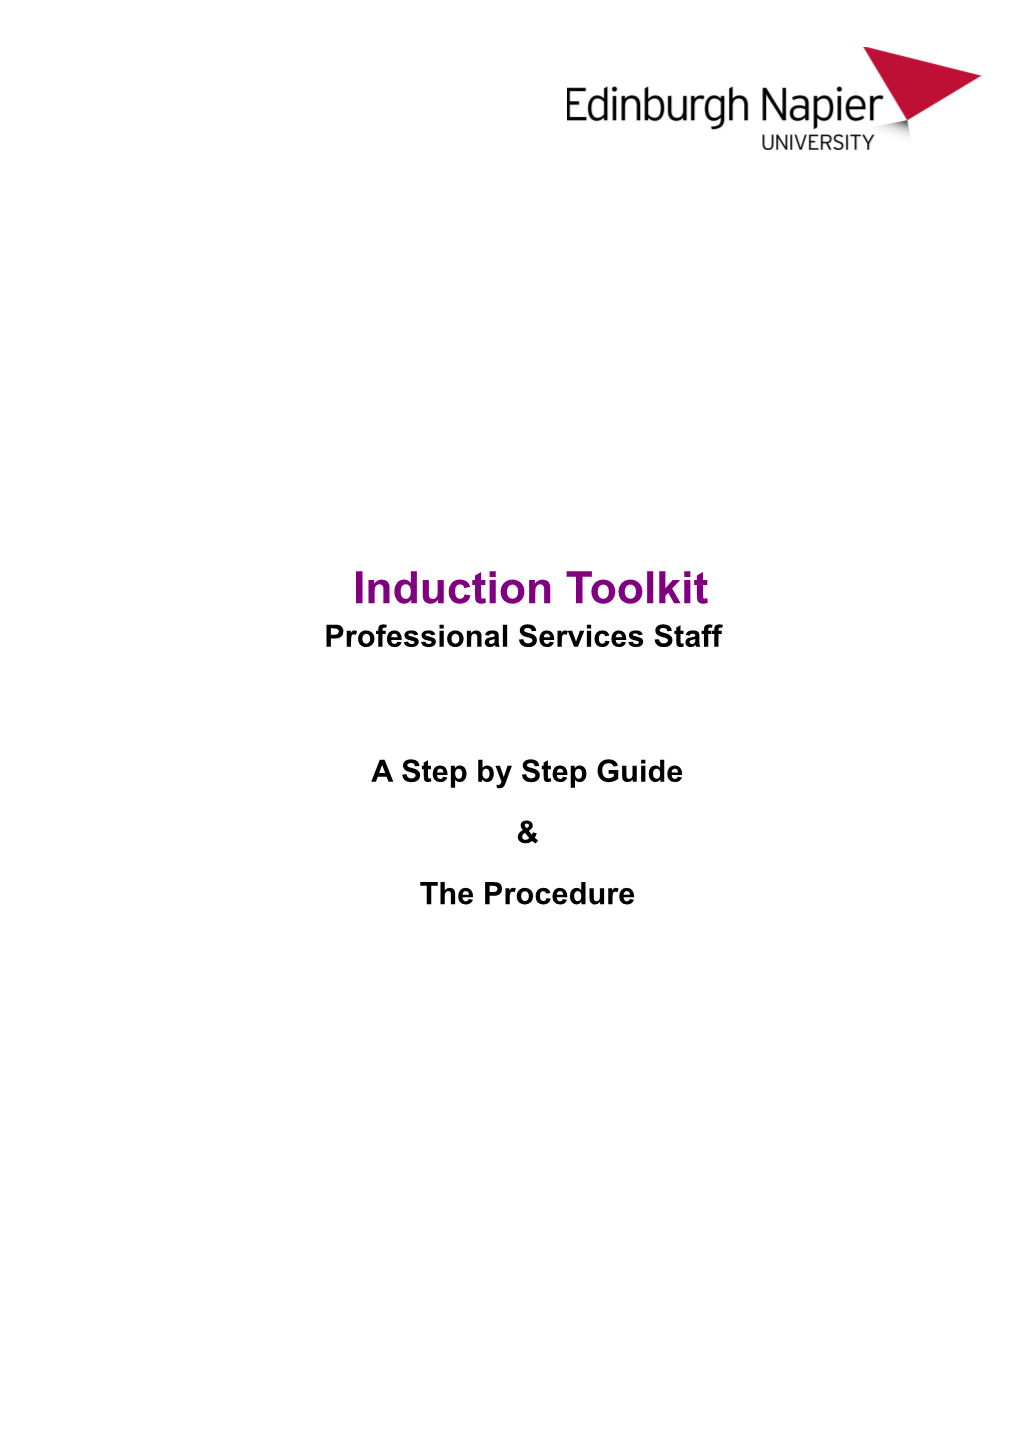 A Step by Step Guide to Induction